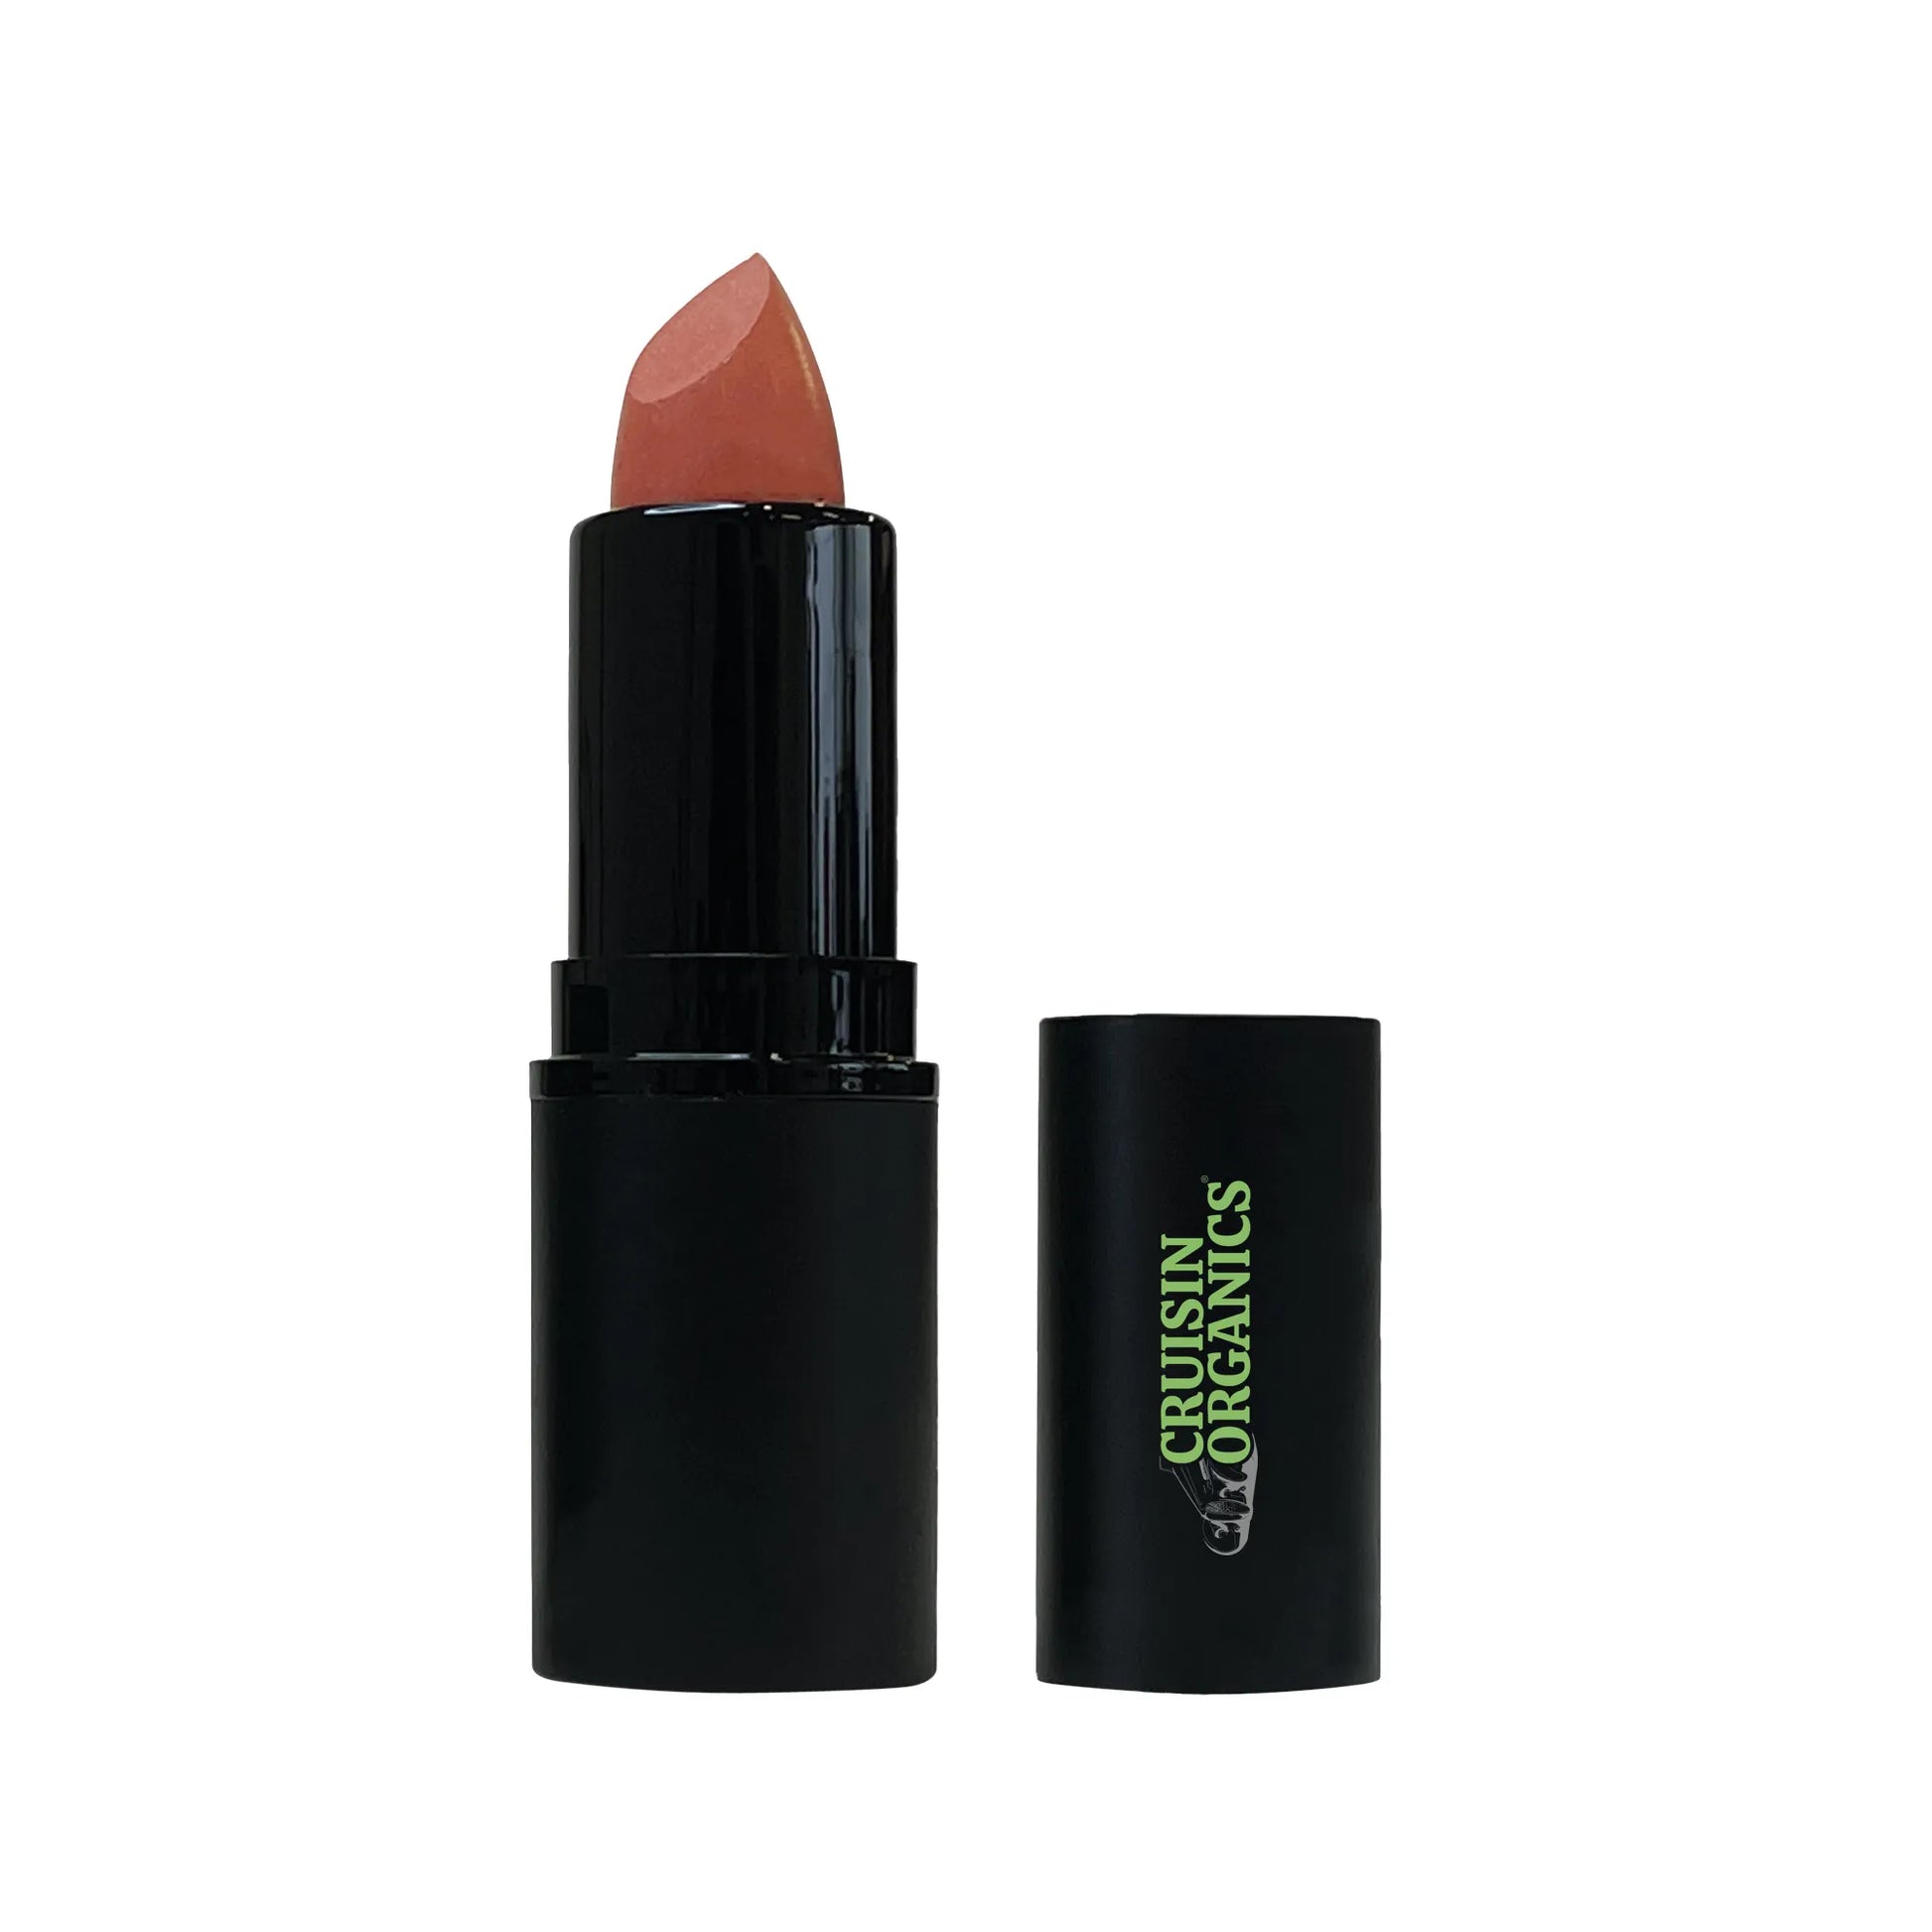 Ultimate lip enhancement with Cruisin Organics Misty Mauve Lipstick. Infused with natural beeswax, this cruelty-free lipstick offers UV protection and a sheer gloss for a unique look. Enriched with jojoba and castor seed, it delivers lip-plumping, moisturizing, and long-lasting shine. Perfect for day or evening wear